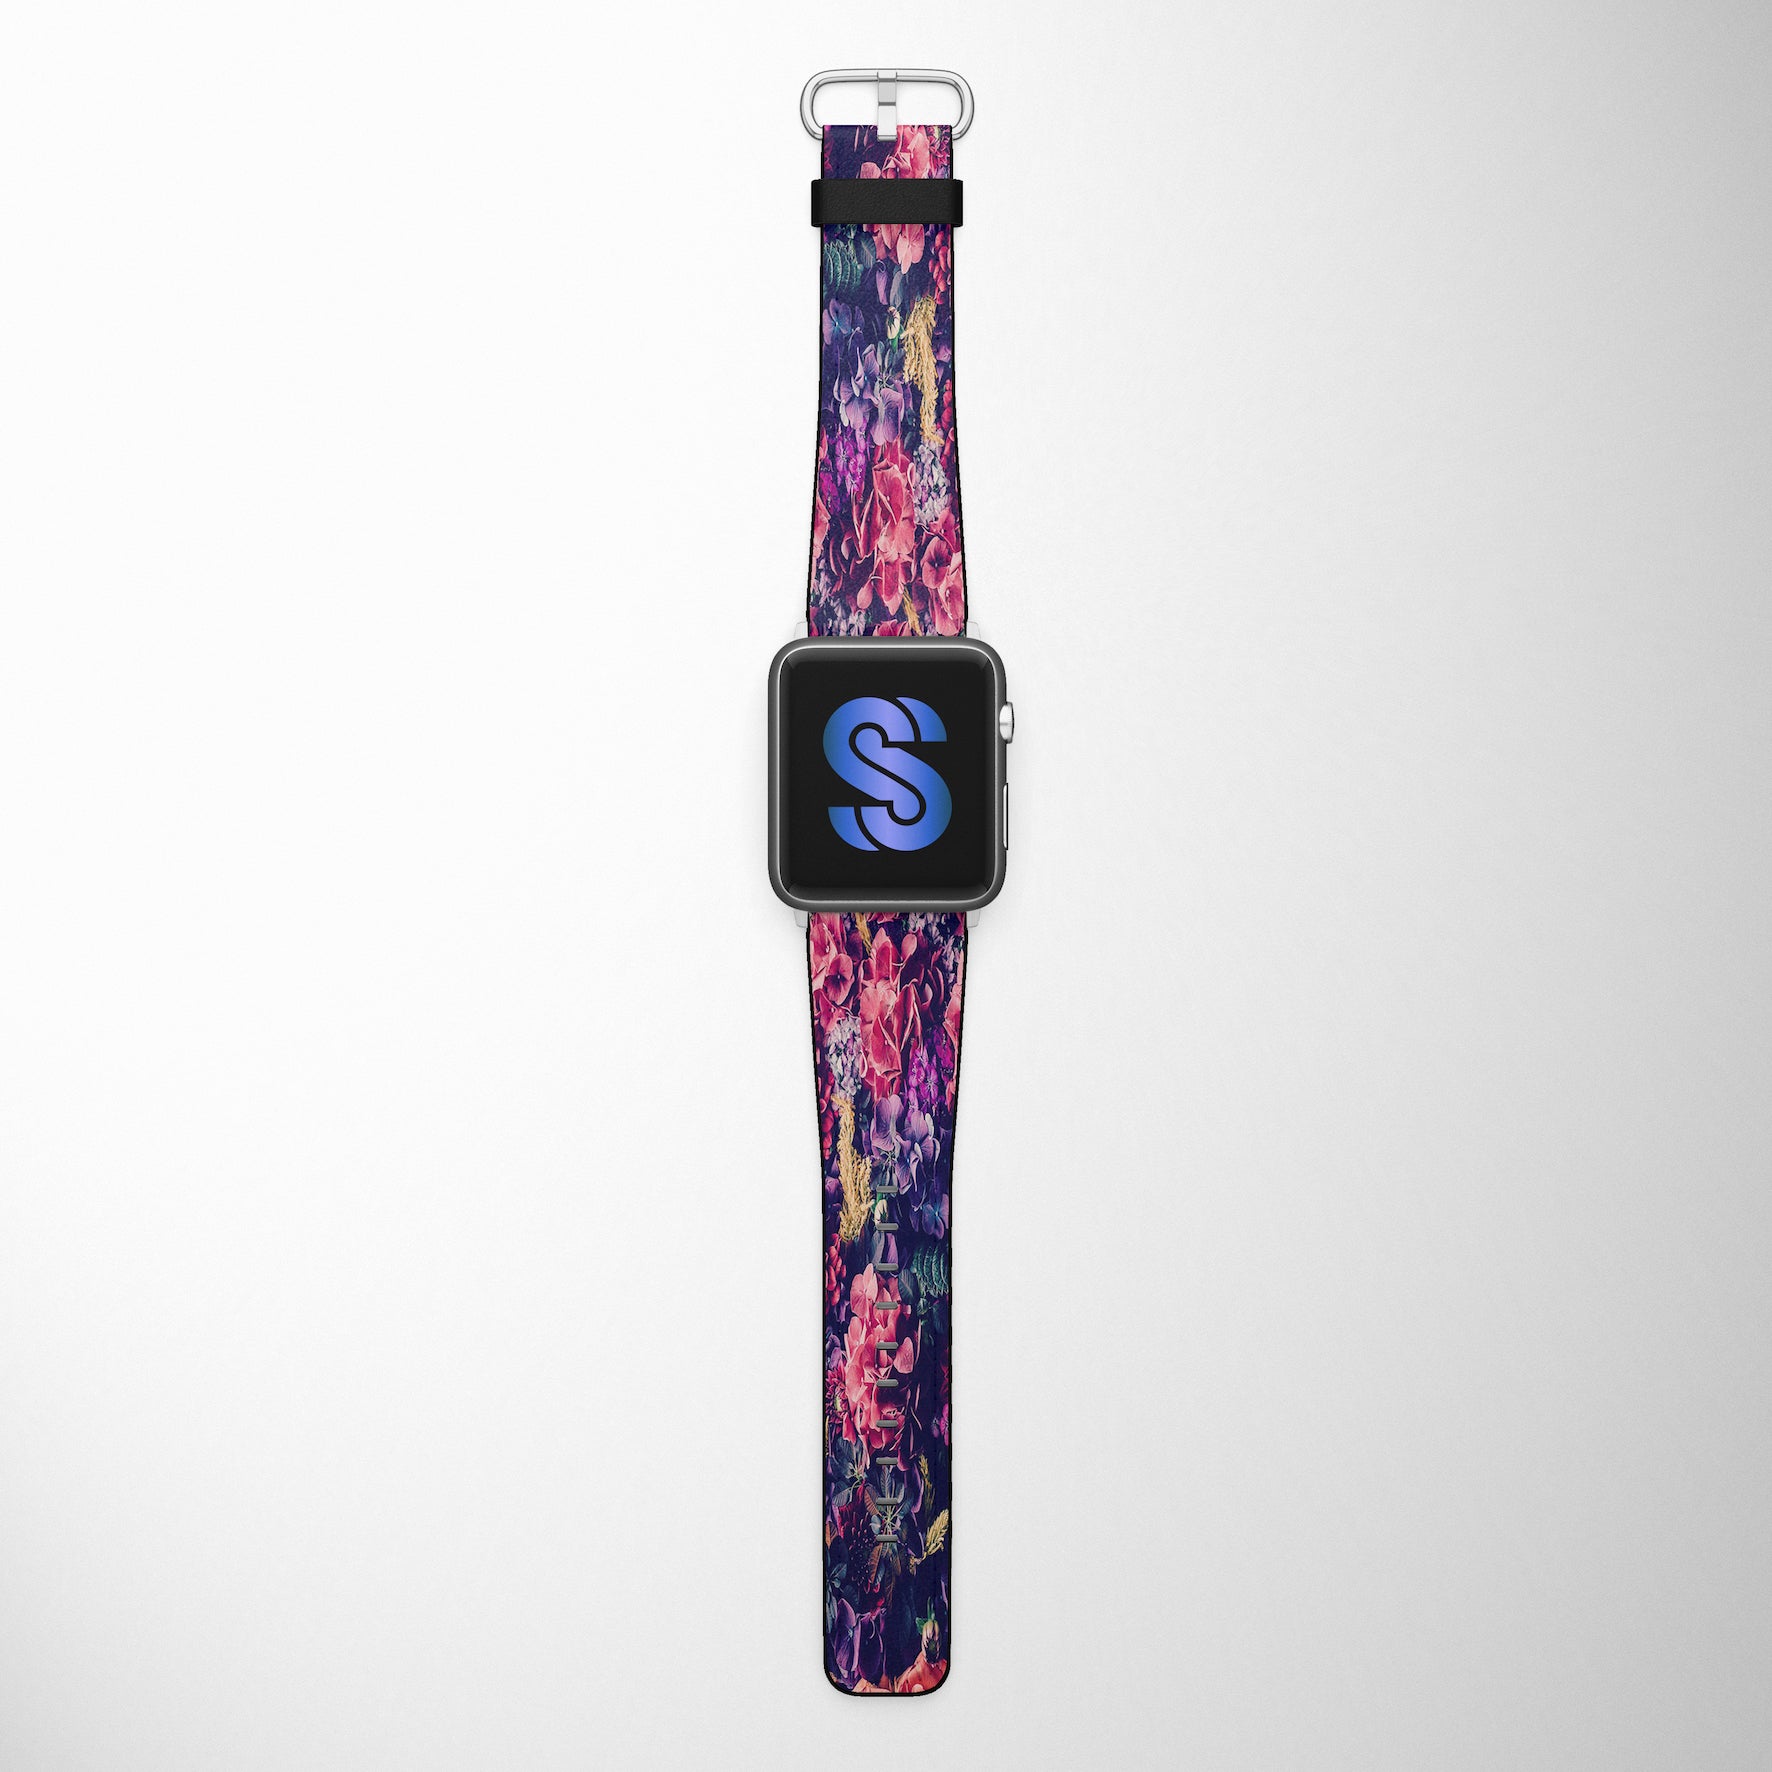 Pink & Purple Floral Faux Leather Apple Watch Band for Apple Watch 1,2,3,4,5,6,SE - www.scottsy.com